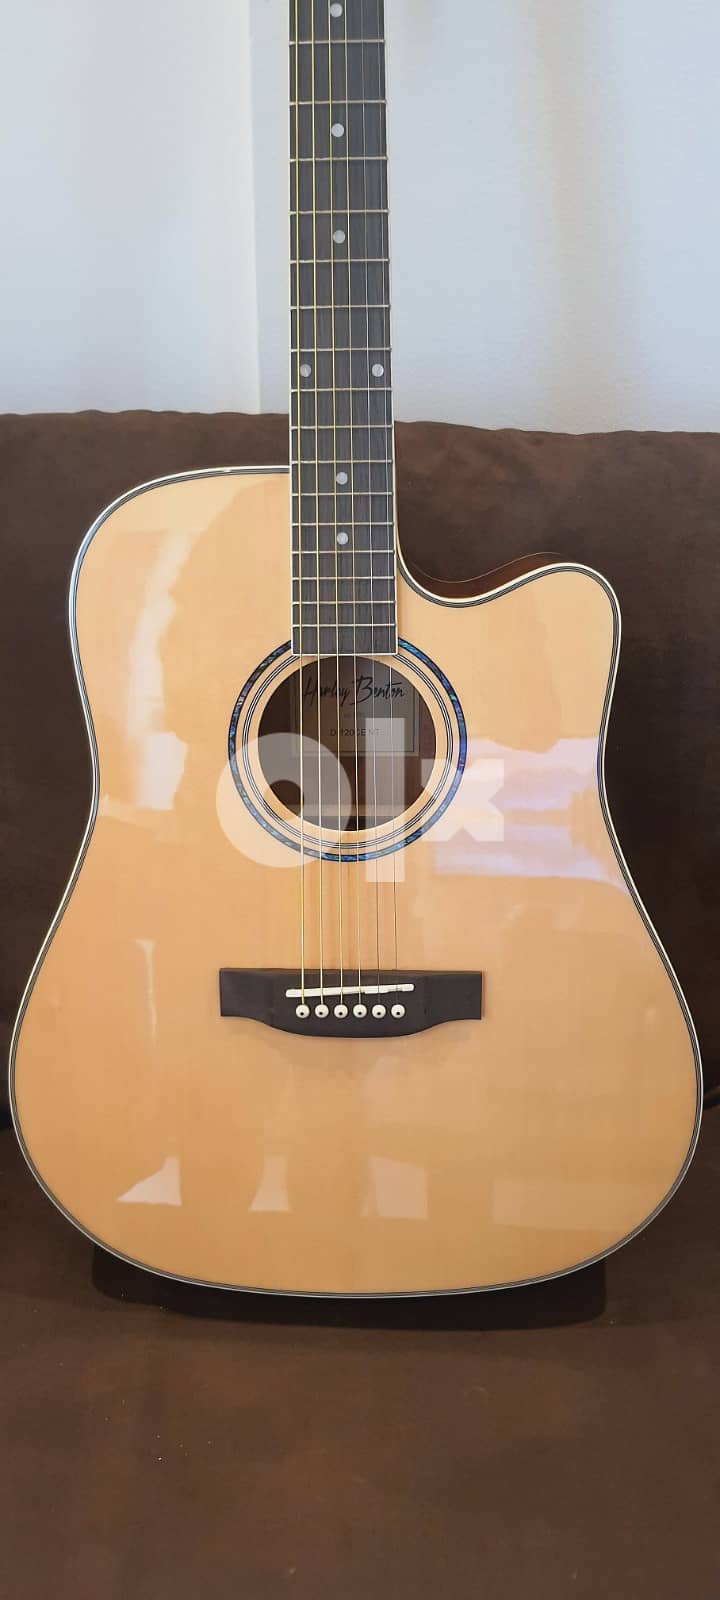 Brand New Acoustic Guitar with Built-in Pickup 13